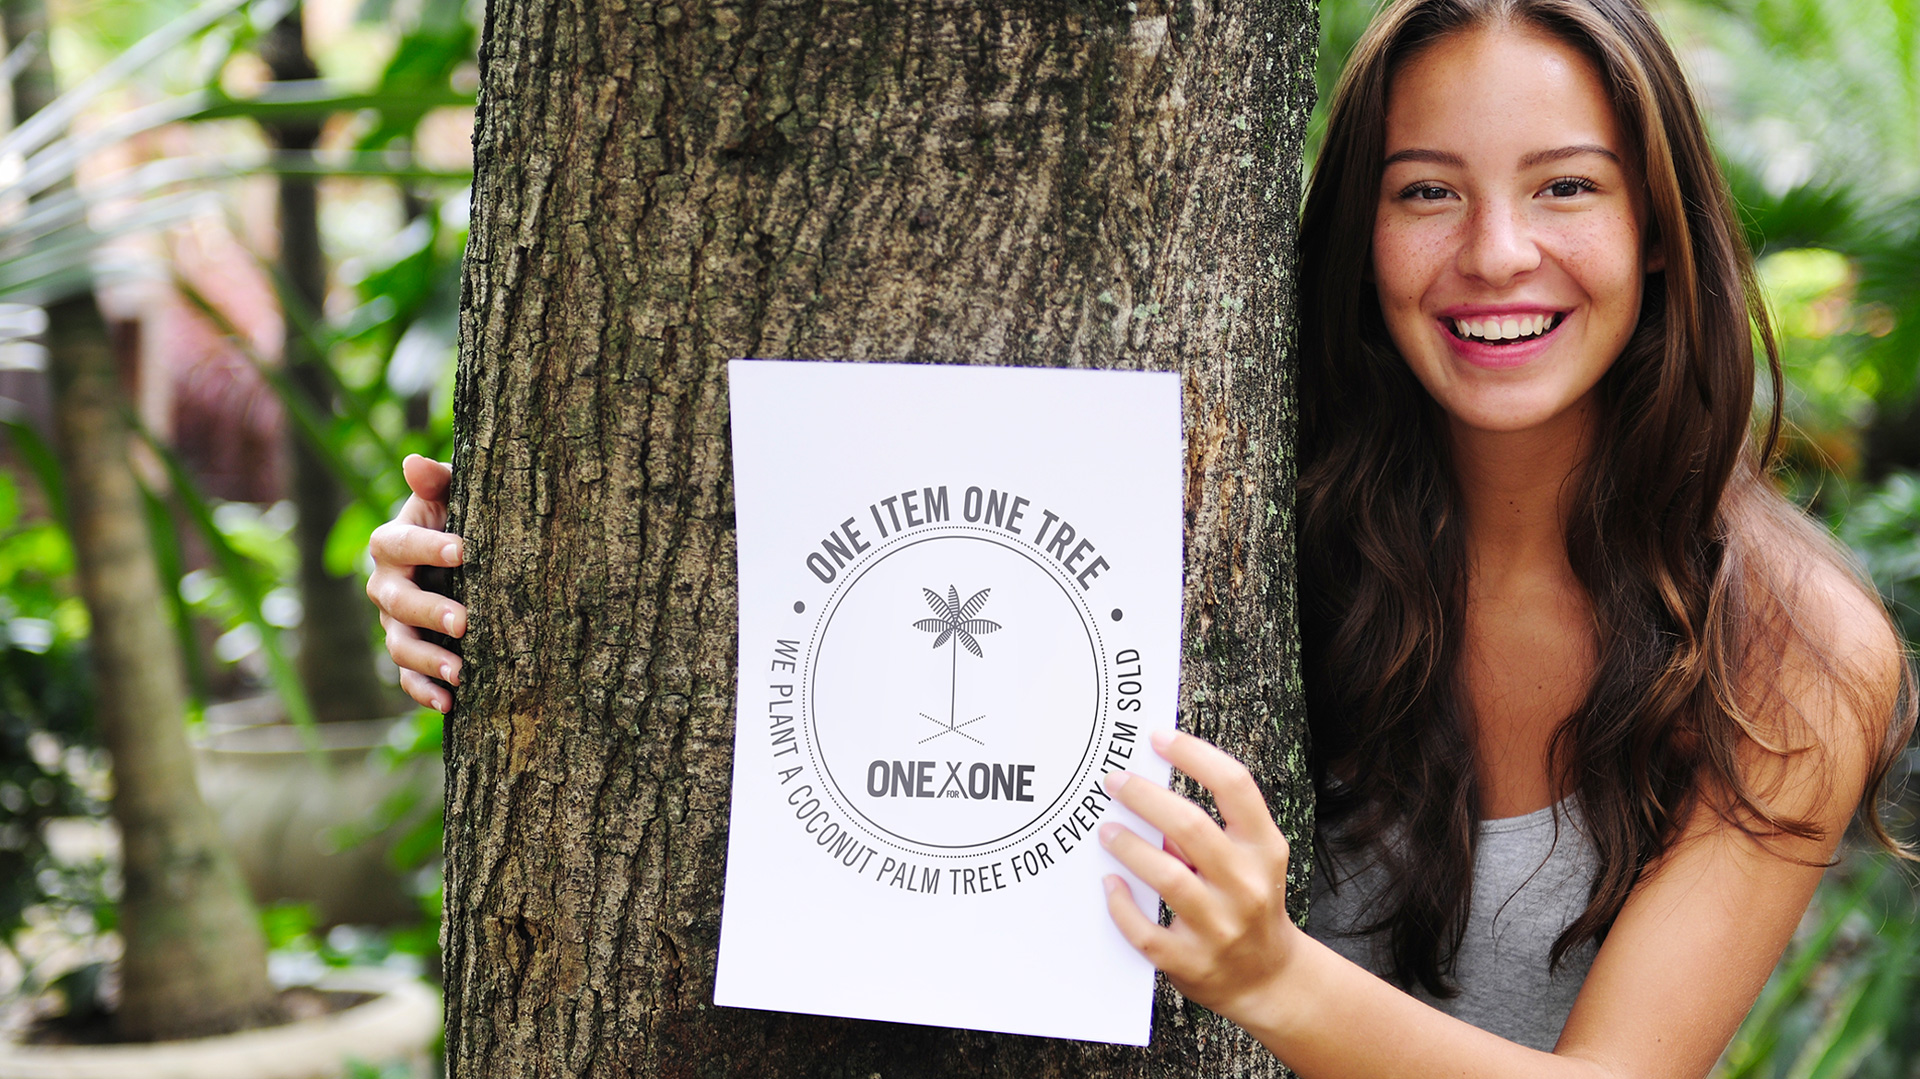 A smiling young woman holding a sign promoting an eco-friendly initiative, "one item one tree," pledging to plant a coconut tree for every product sold.